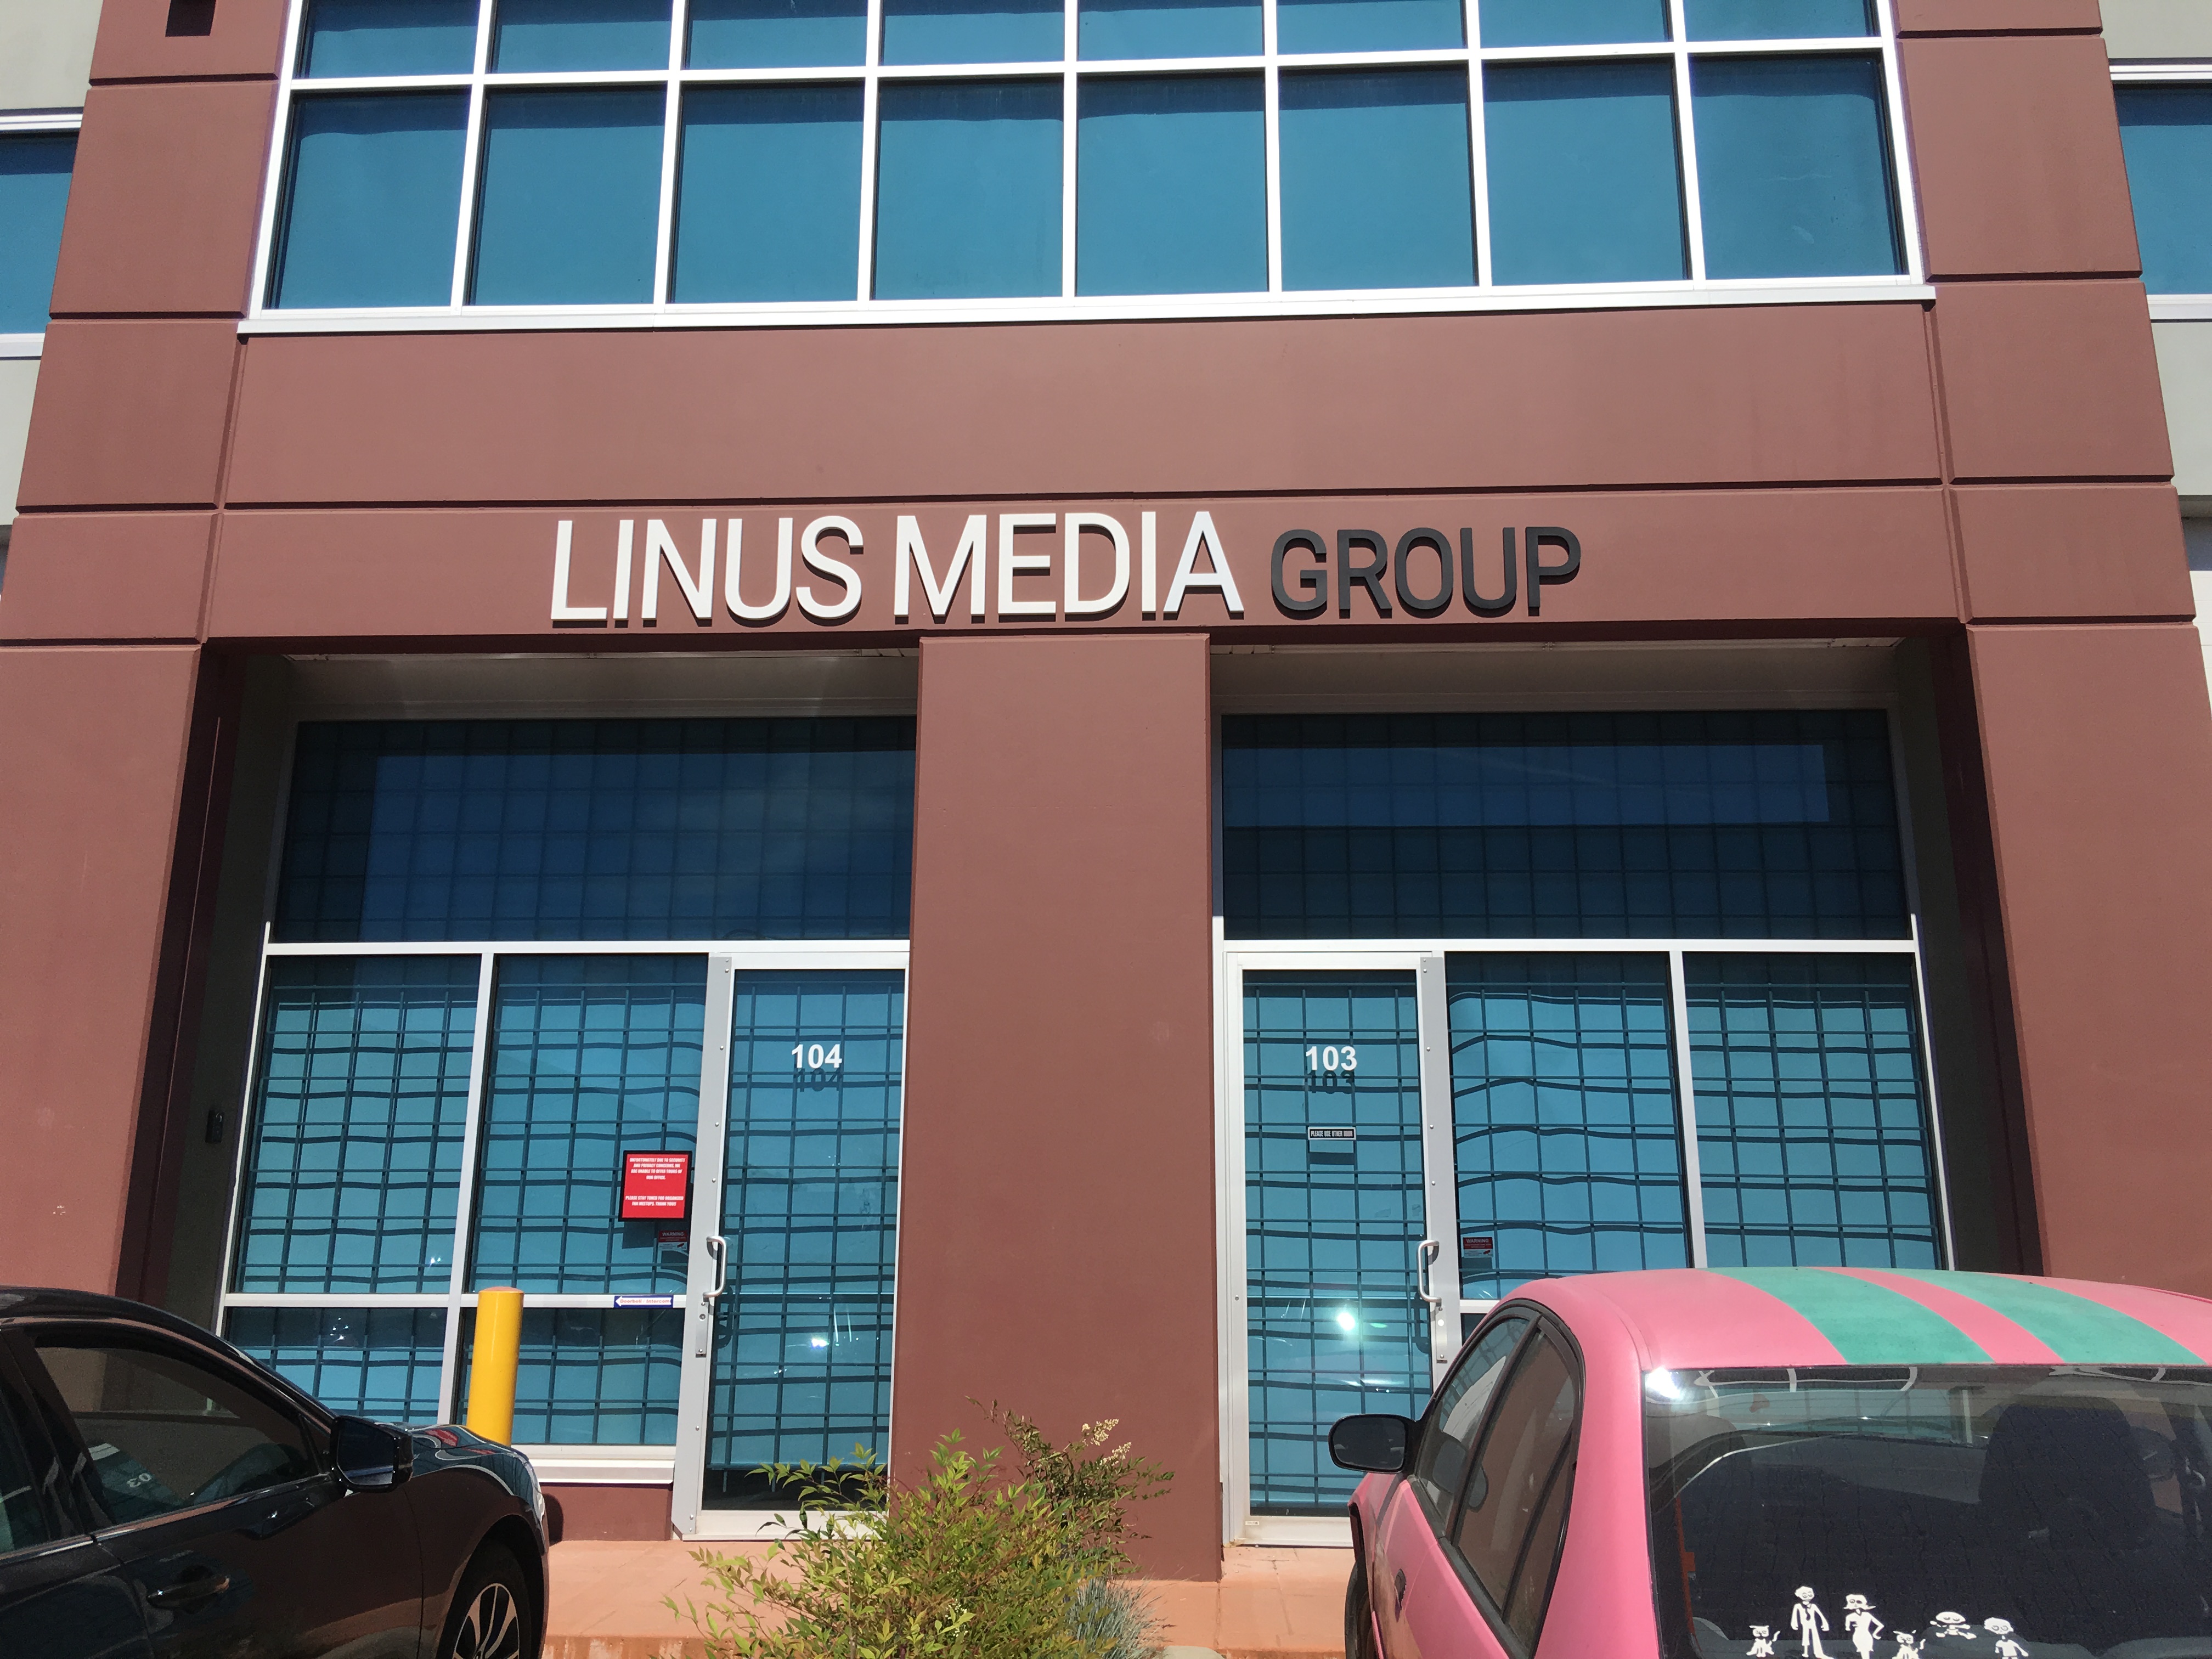 What does linus media group do